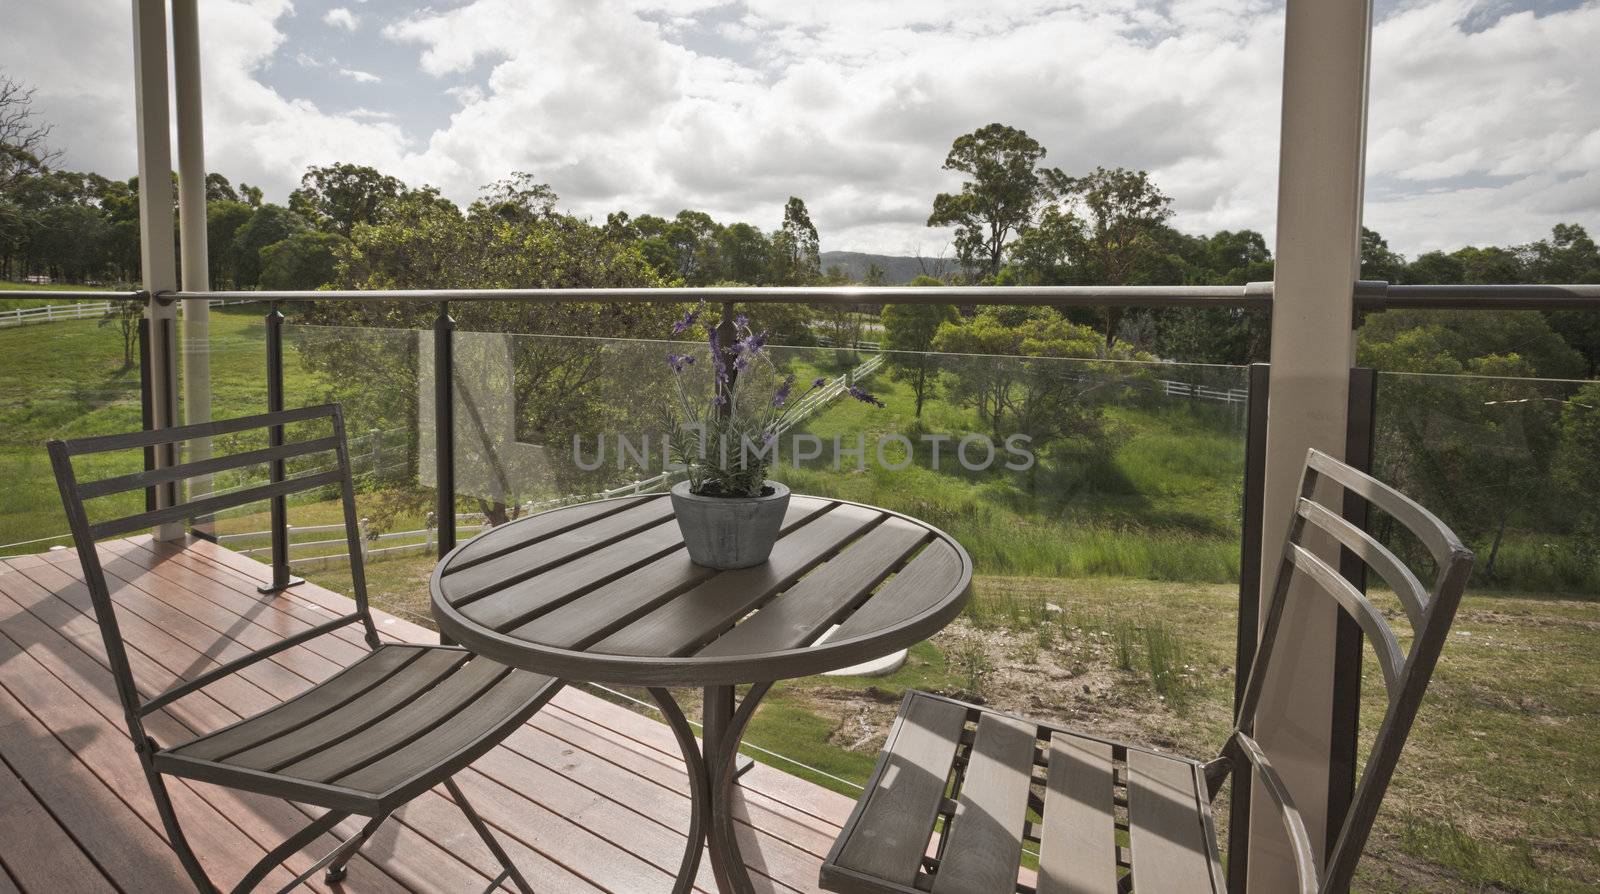 Wooden table and chairs on a glassed in timber deck overlooking green countryside